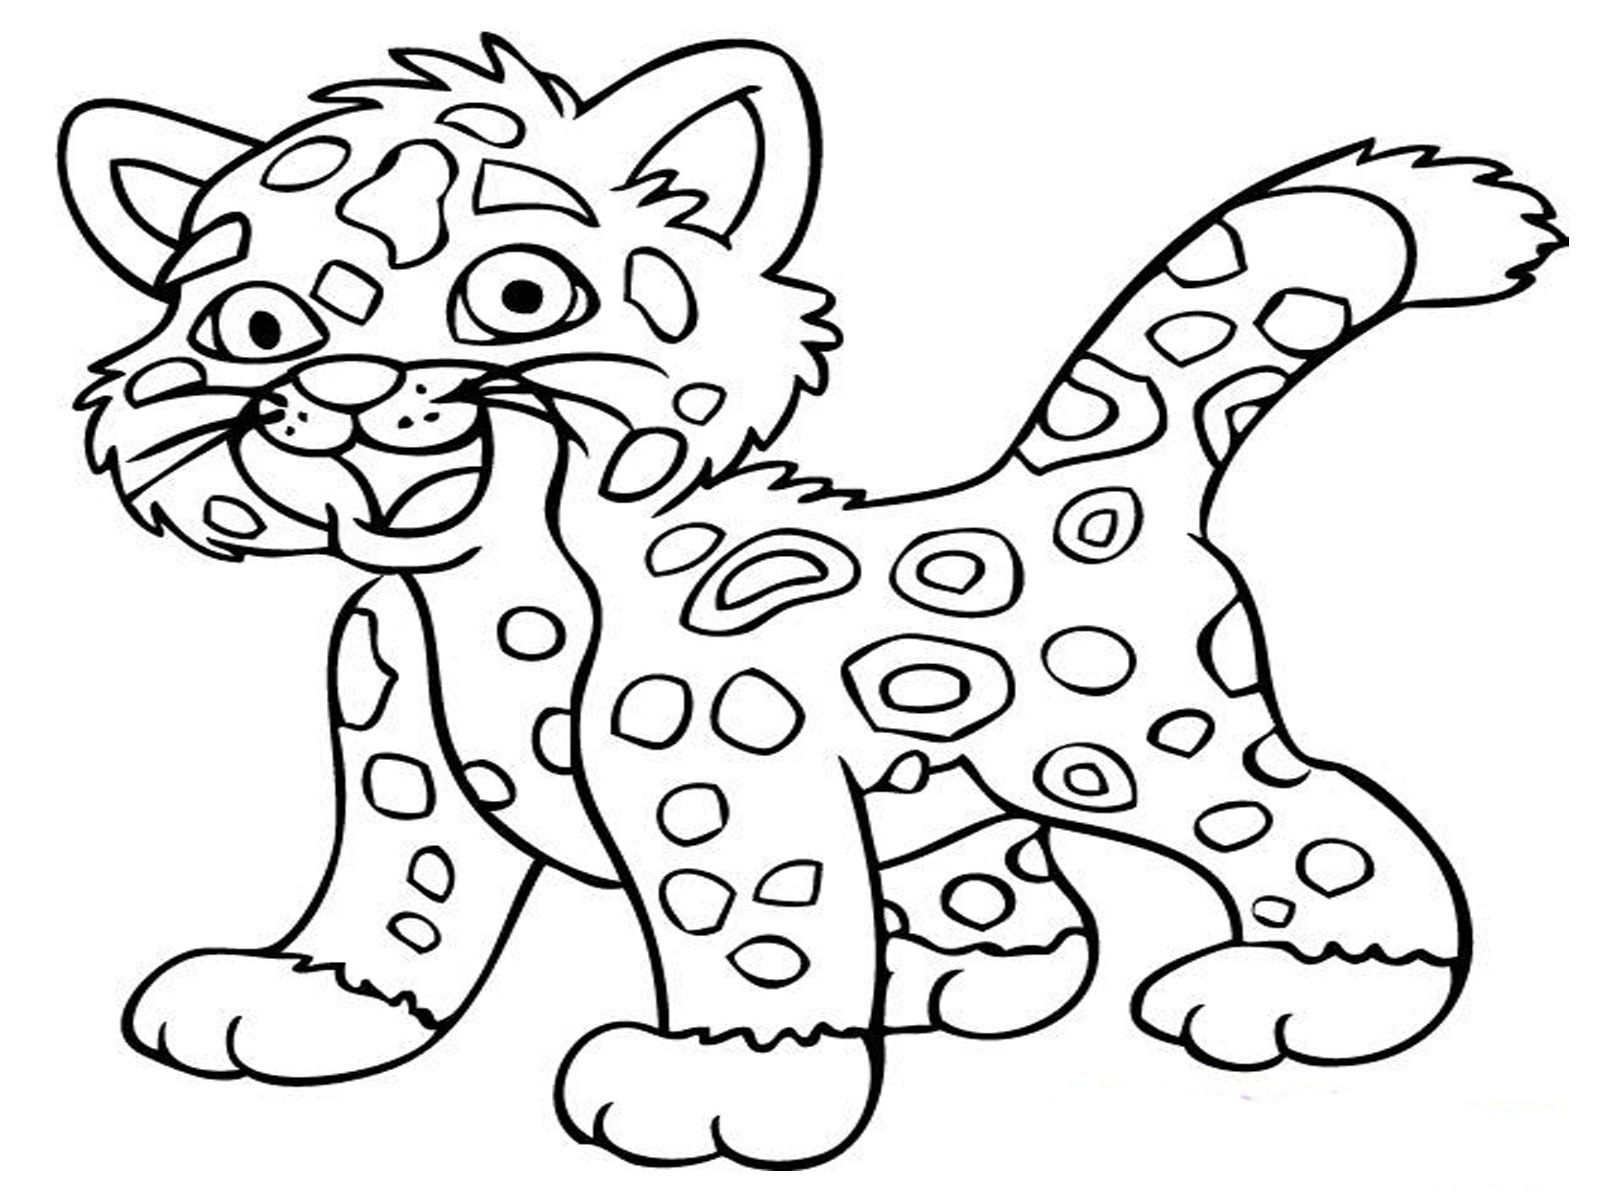 Related Animal Coloring Pages item-15535, Anime Animals Coloring ...